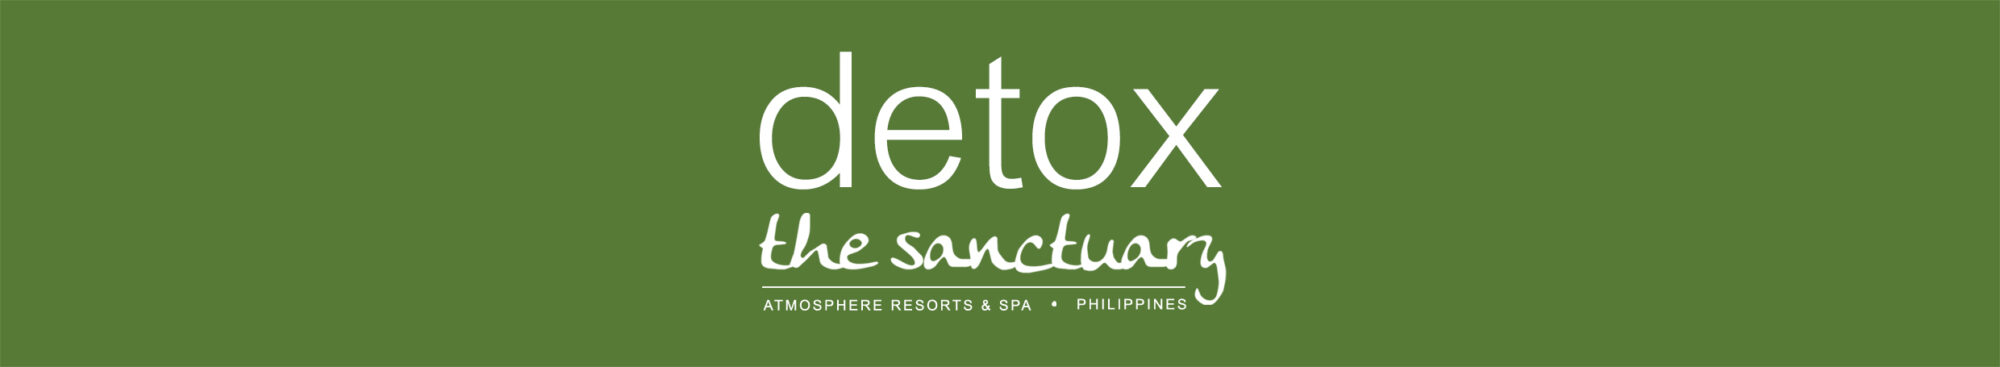 Detox programs at Atmosphere in the Philippines